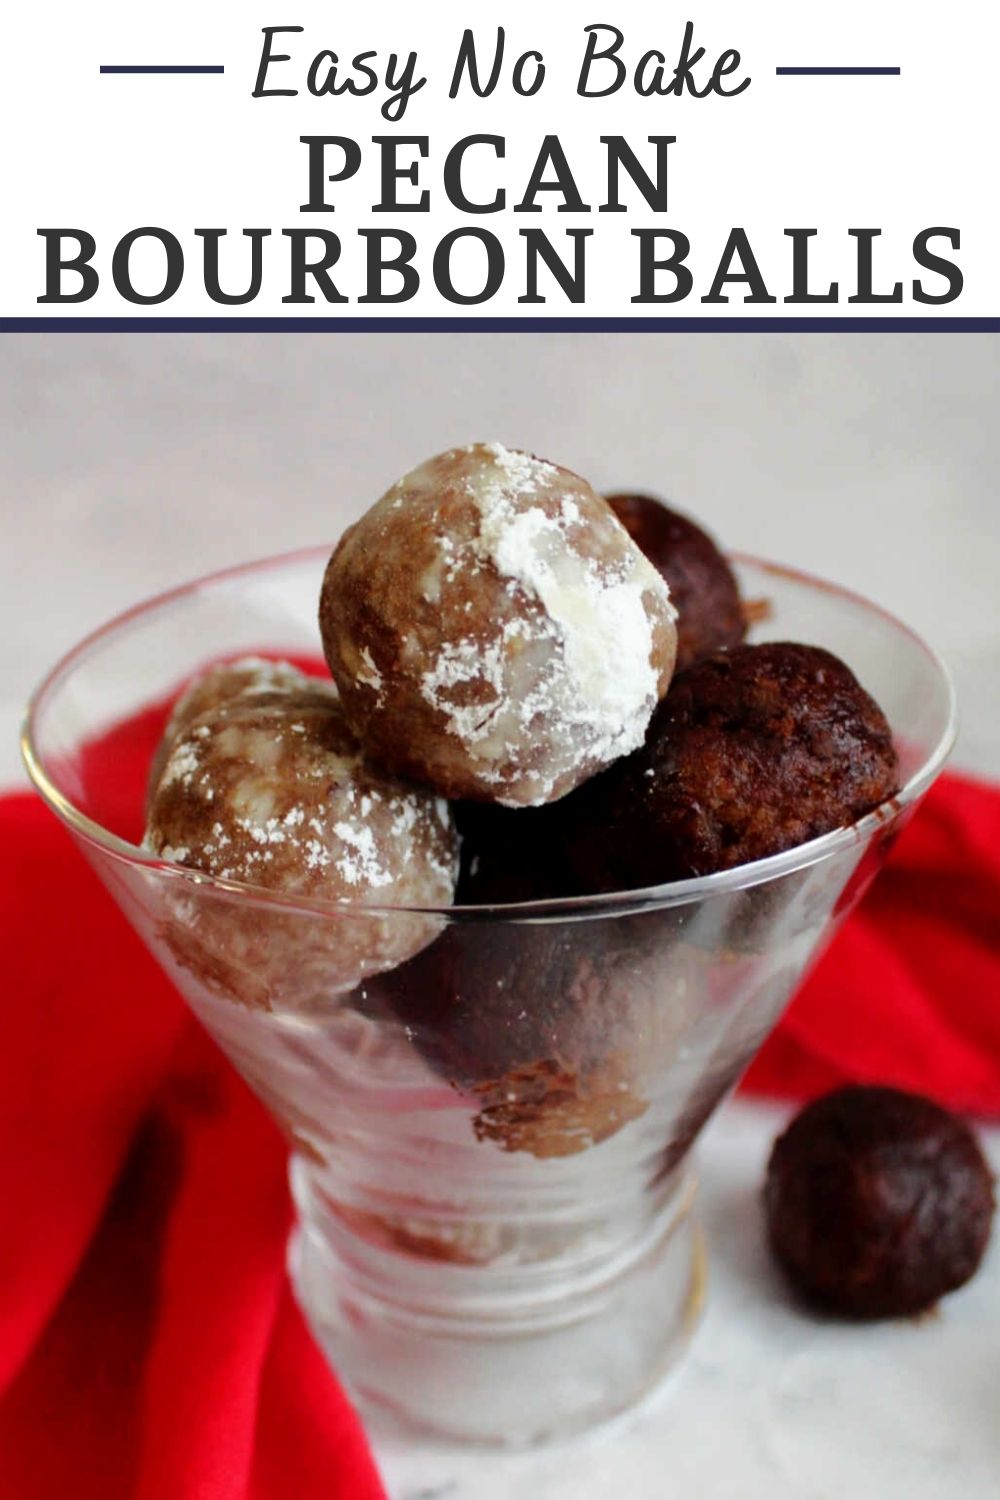 Pecan bourbon balls are a perfect adult treat. They take the classic southern flavors and turn them into an easy 4 ingredient no bake treat.